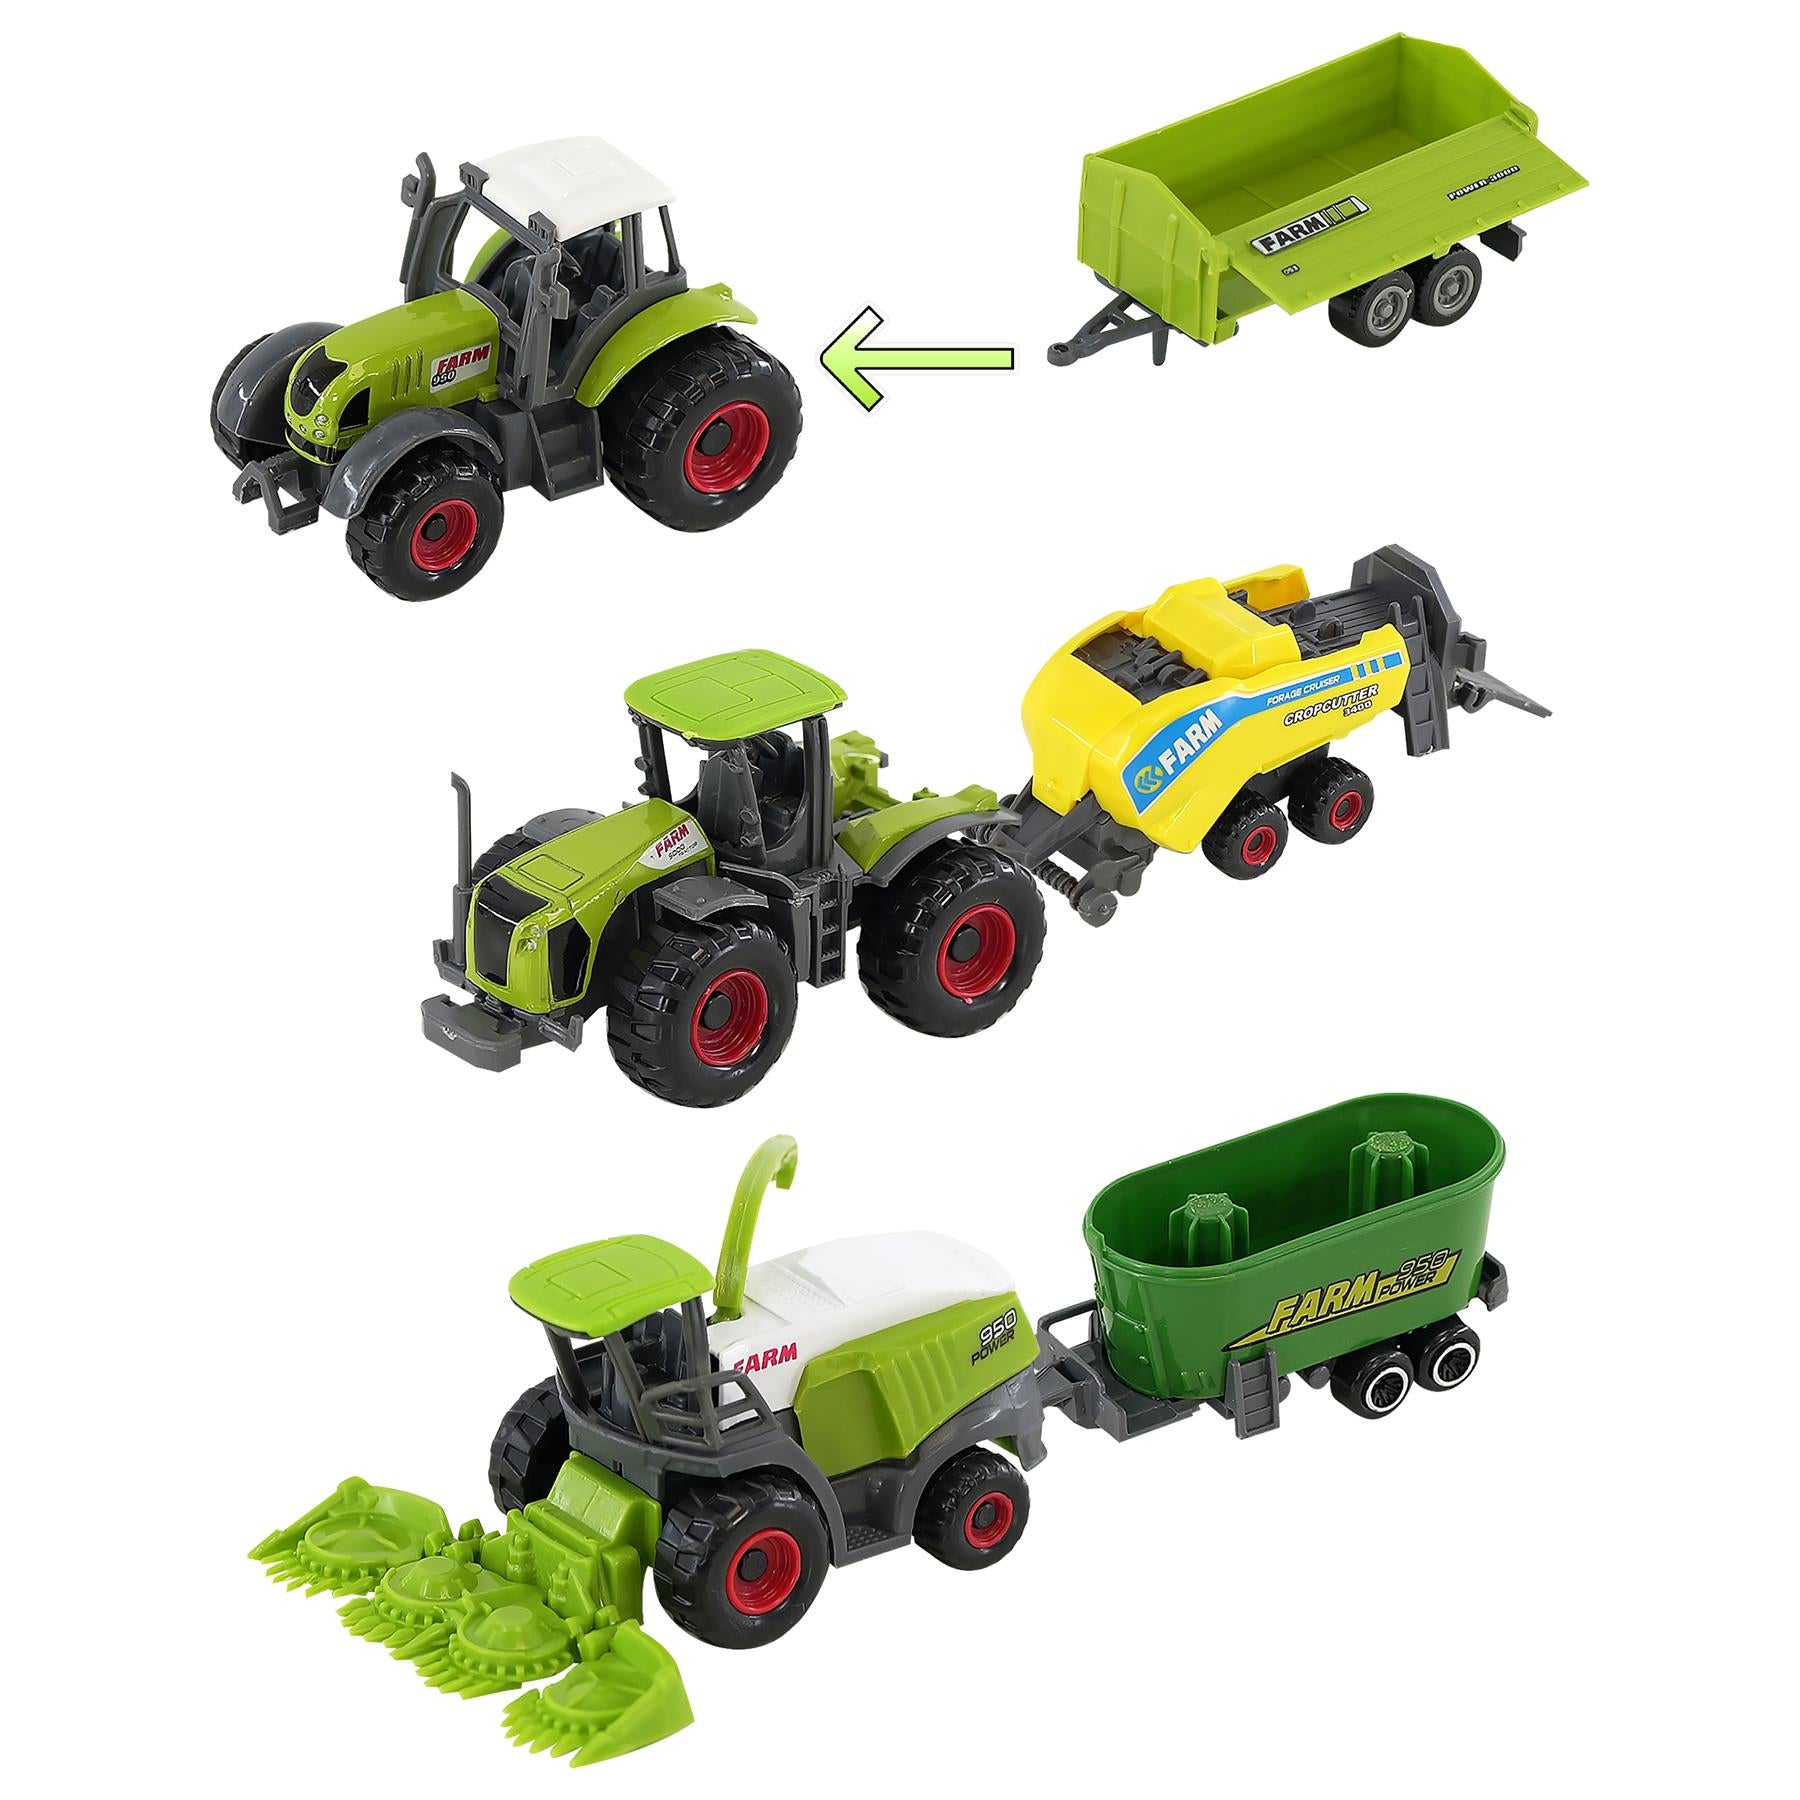 Diecast Tractor Set Collect Vehicles Play Set 22 Piece by The Magic Toy Shop - UKBuyZone